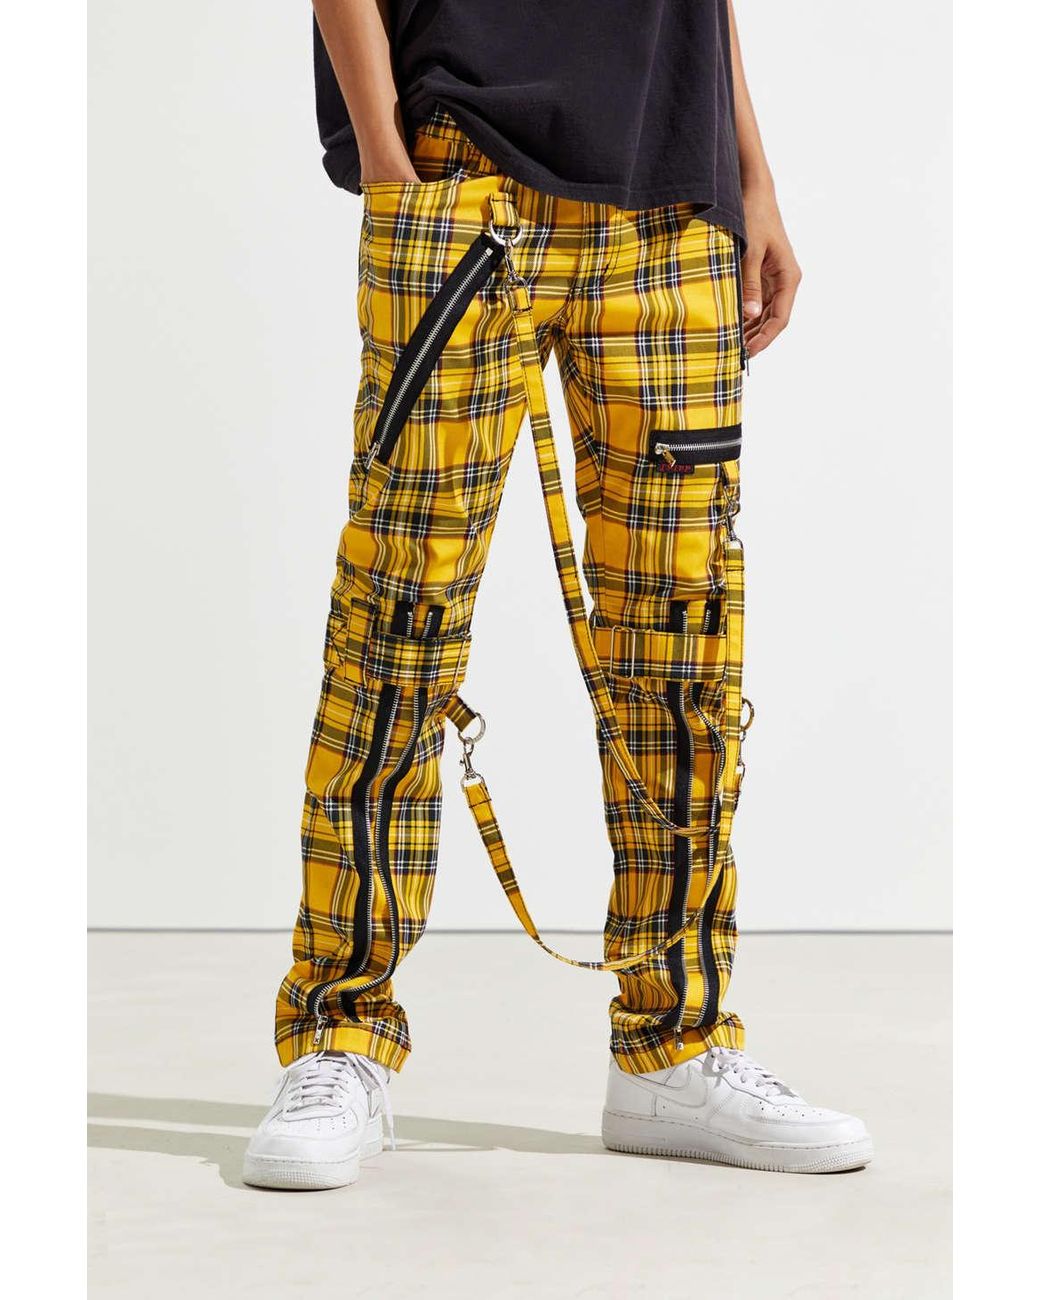 Tripp Nyc Zip Chain Plaid Pant in Yellow for Men